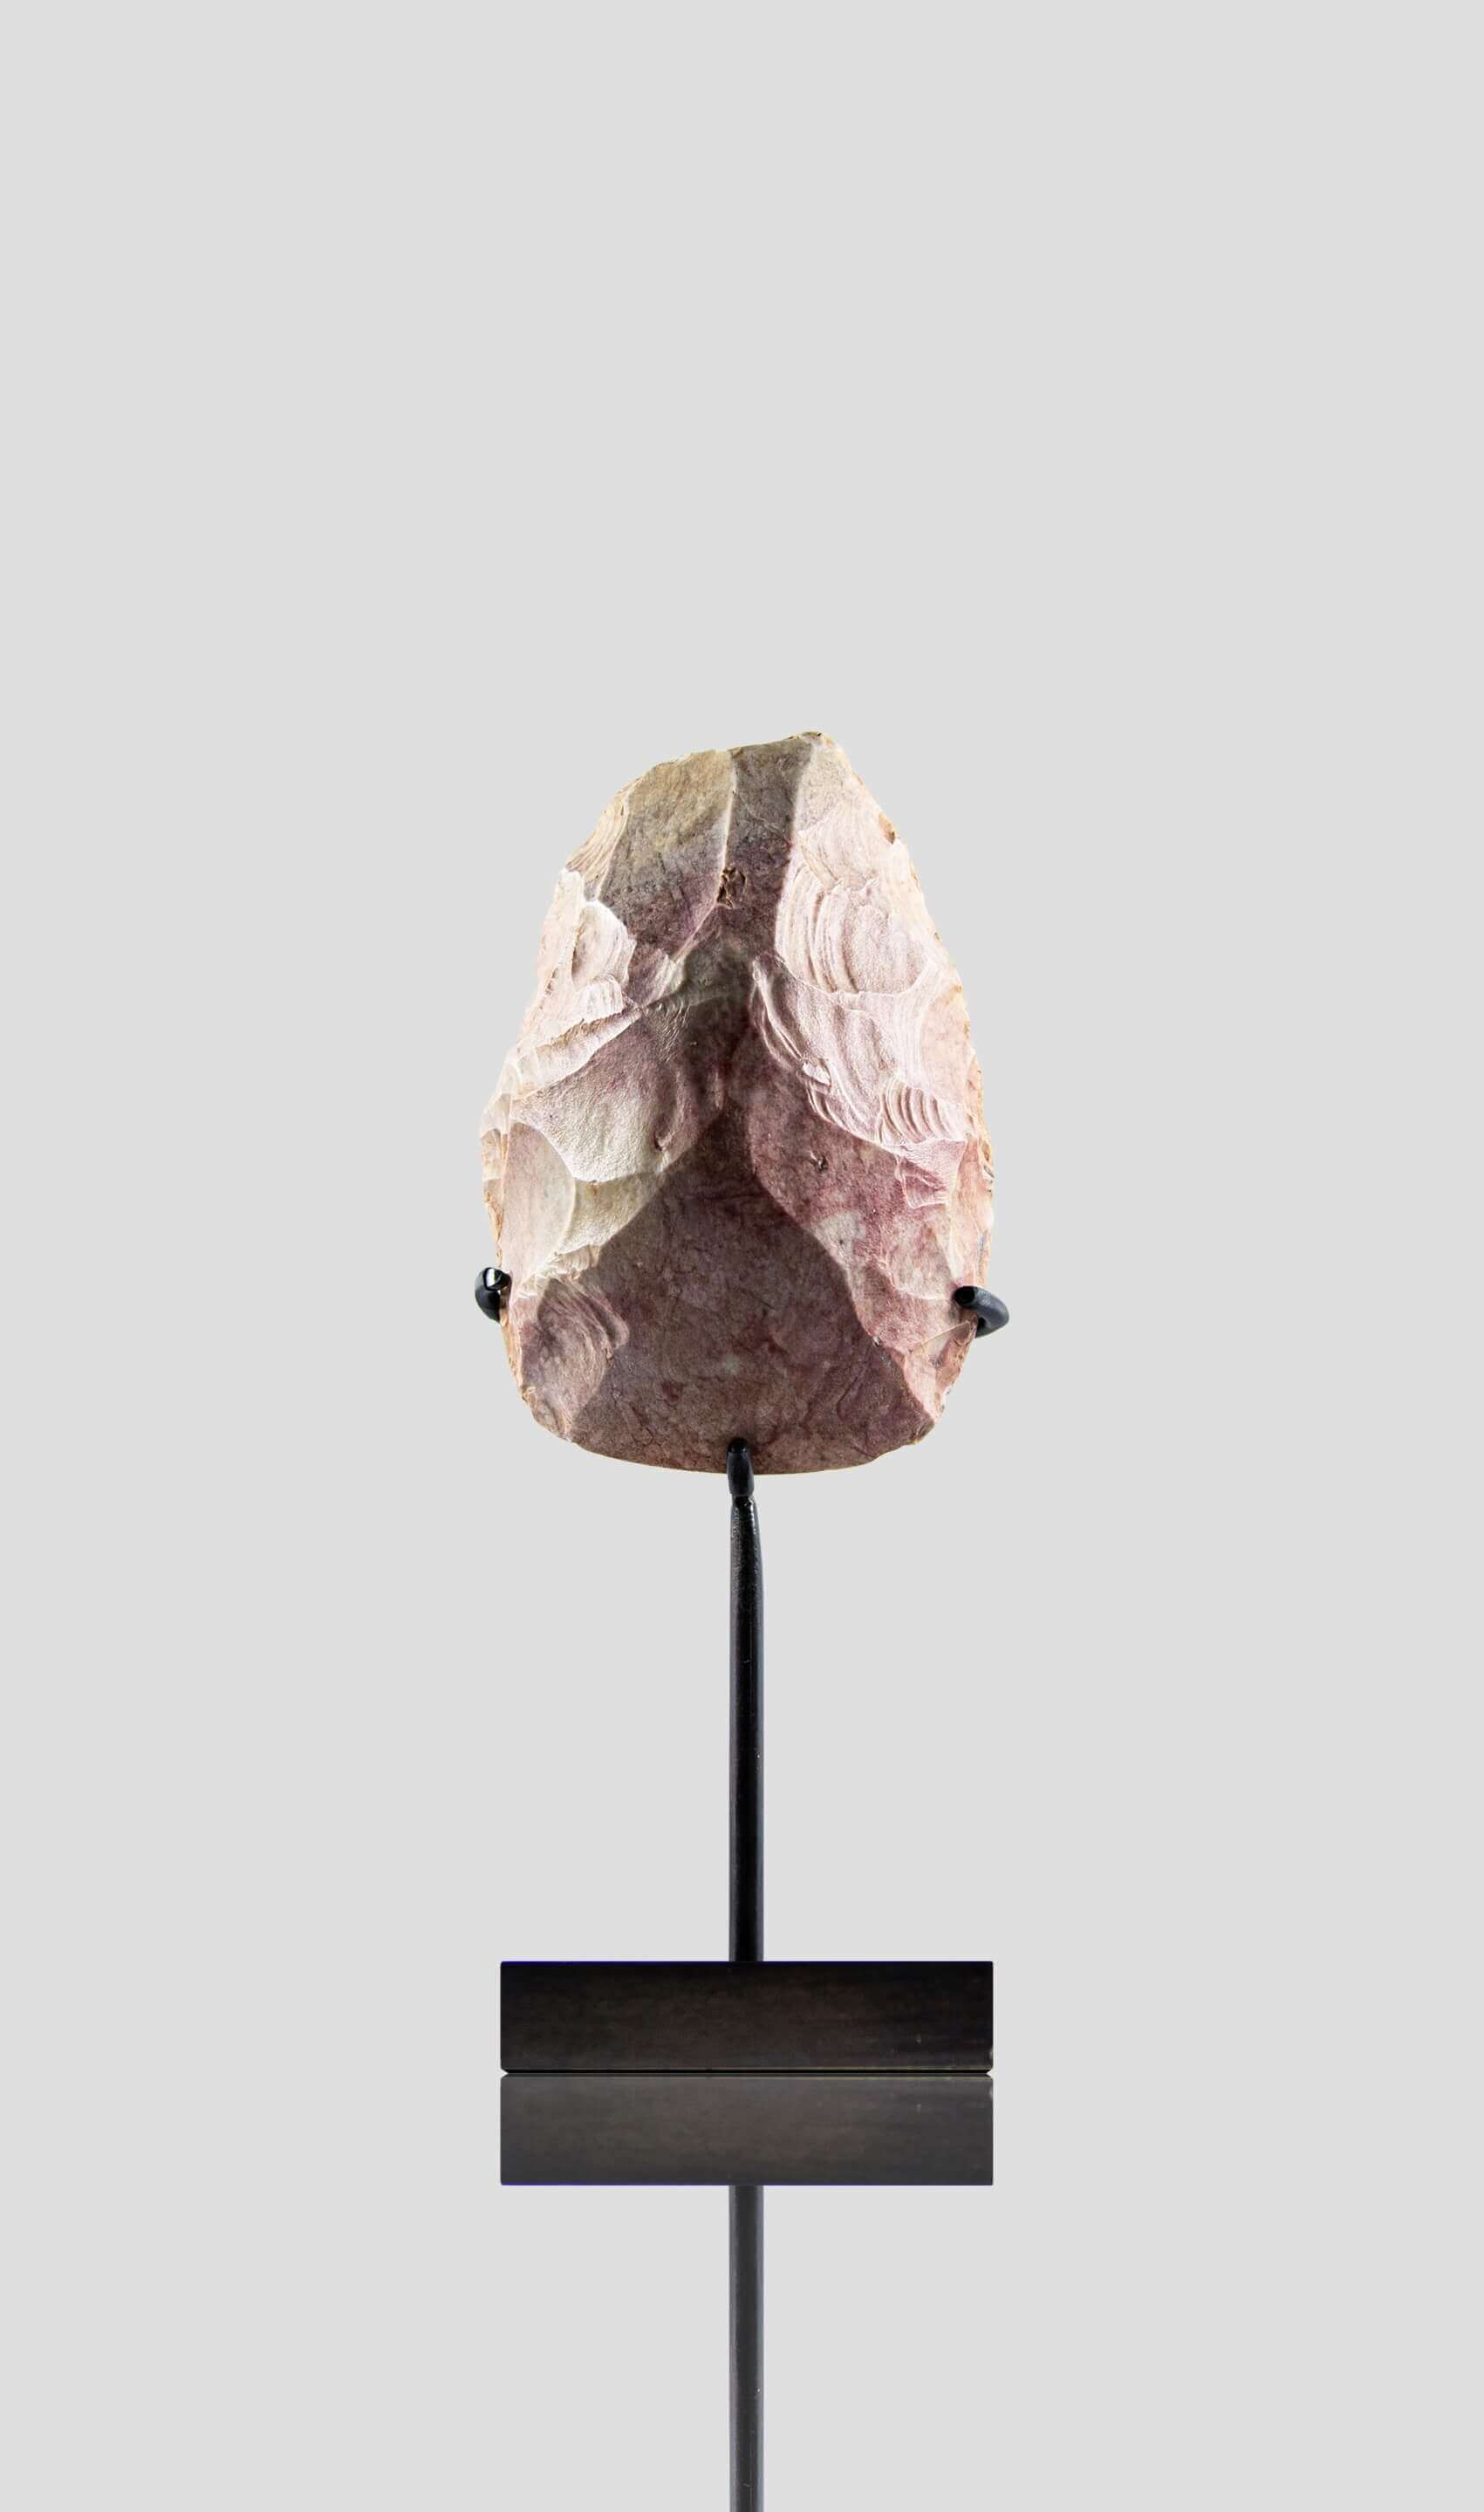 Artefact Neolithic Capsian Hand Axe [8,500 BC] 190mm